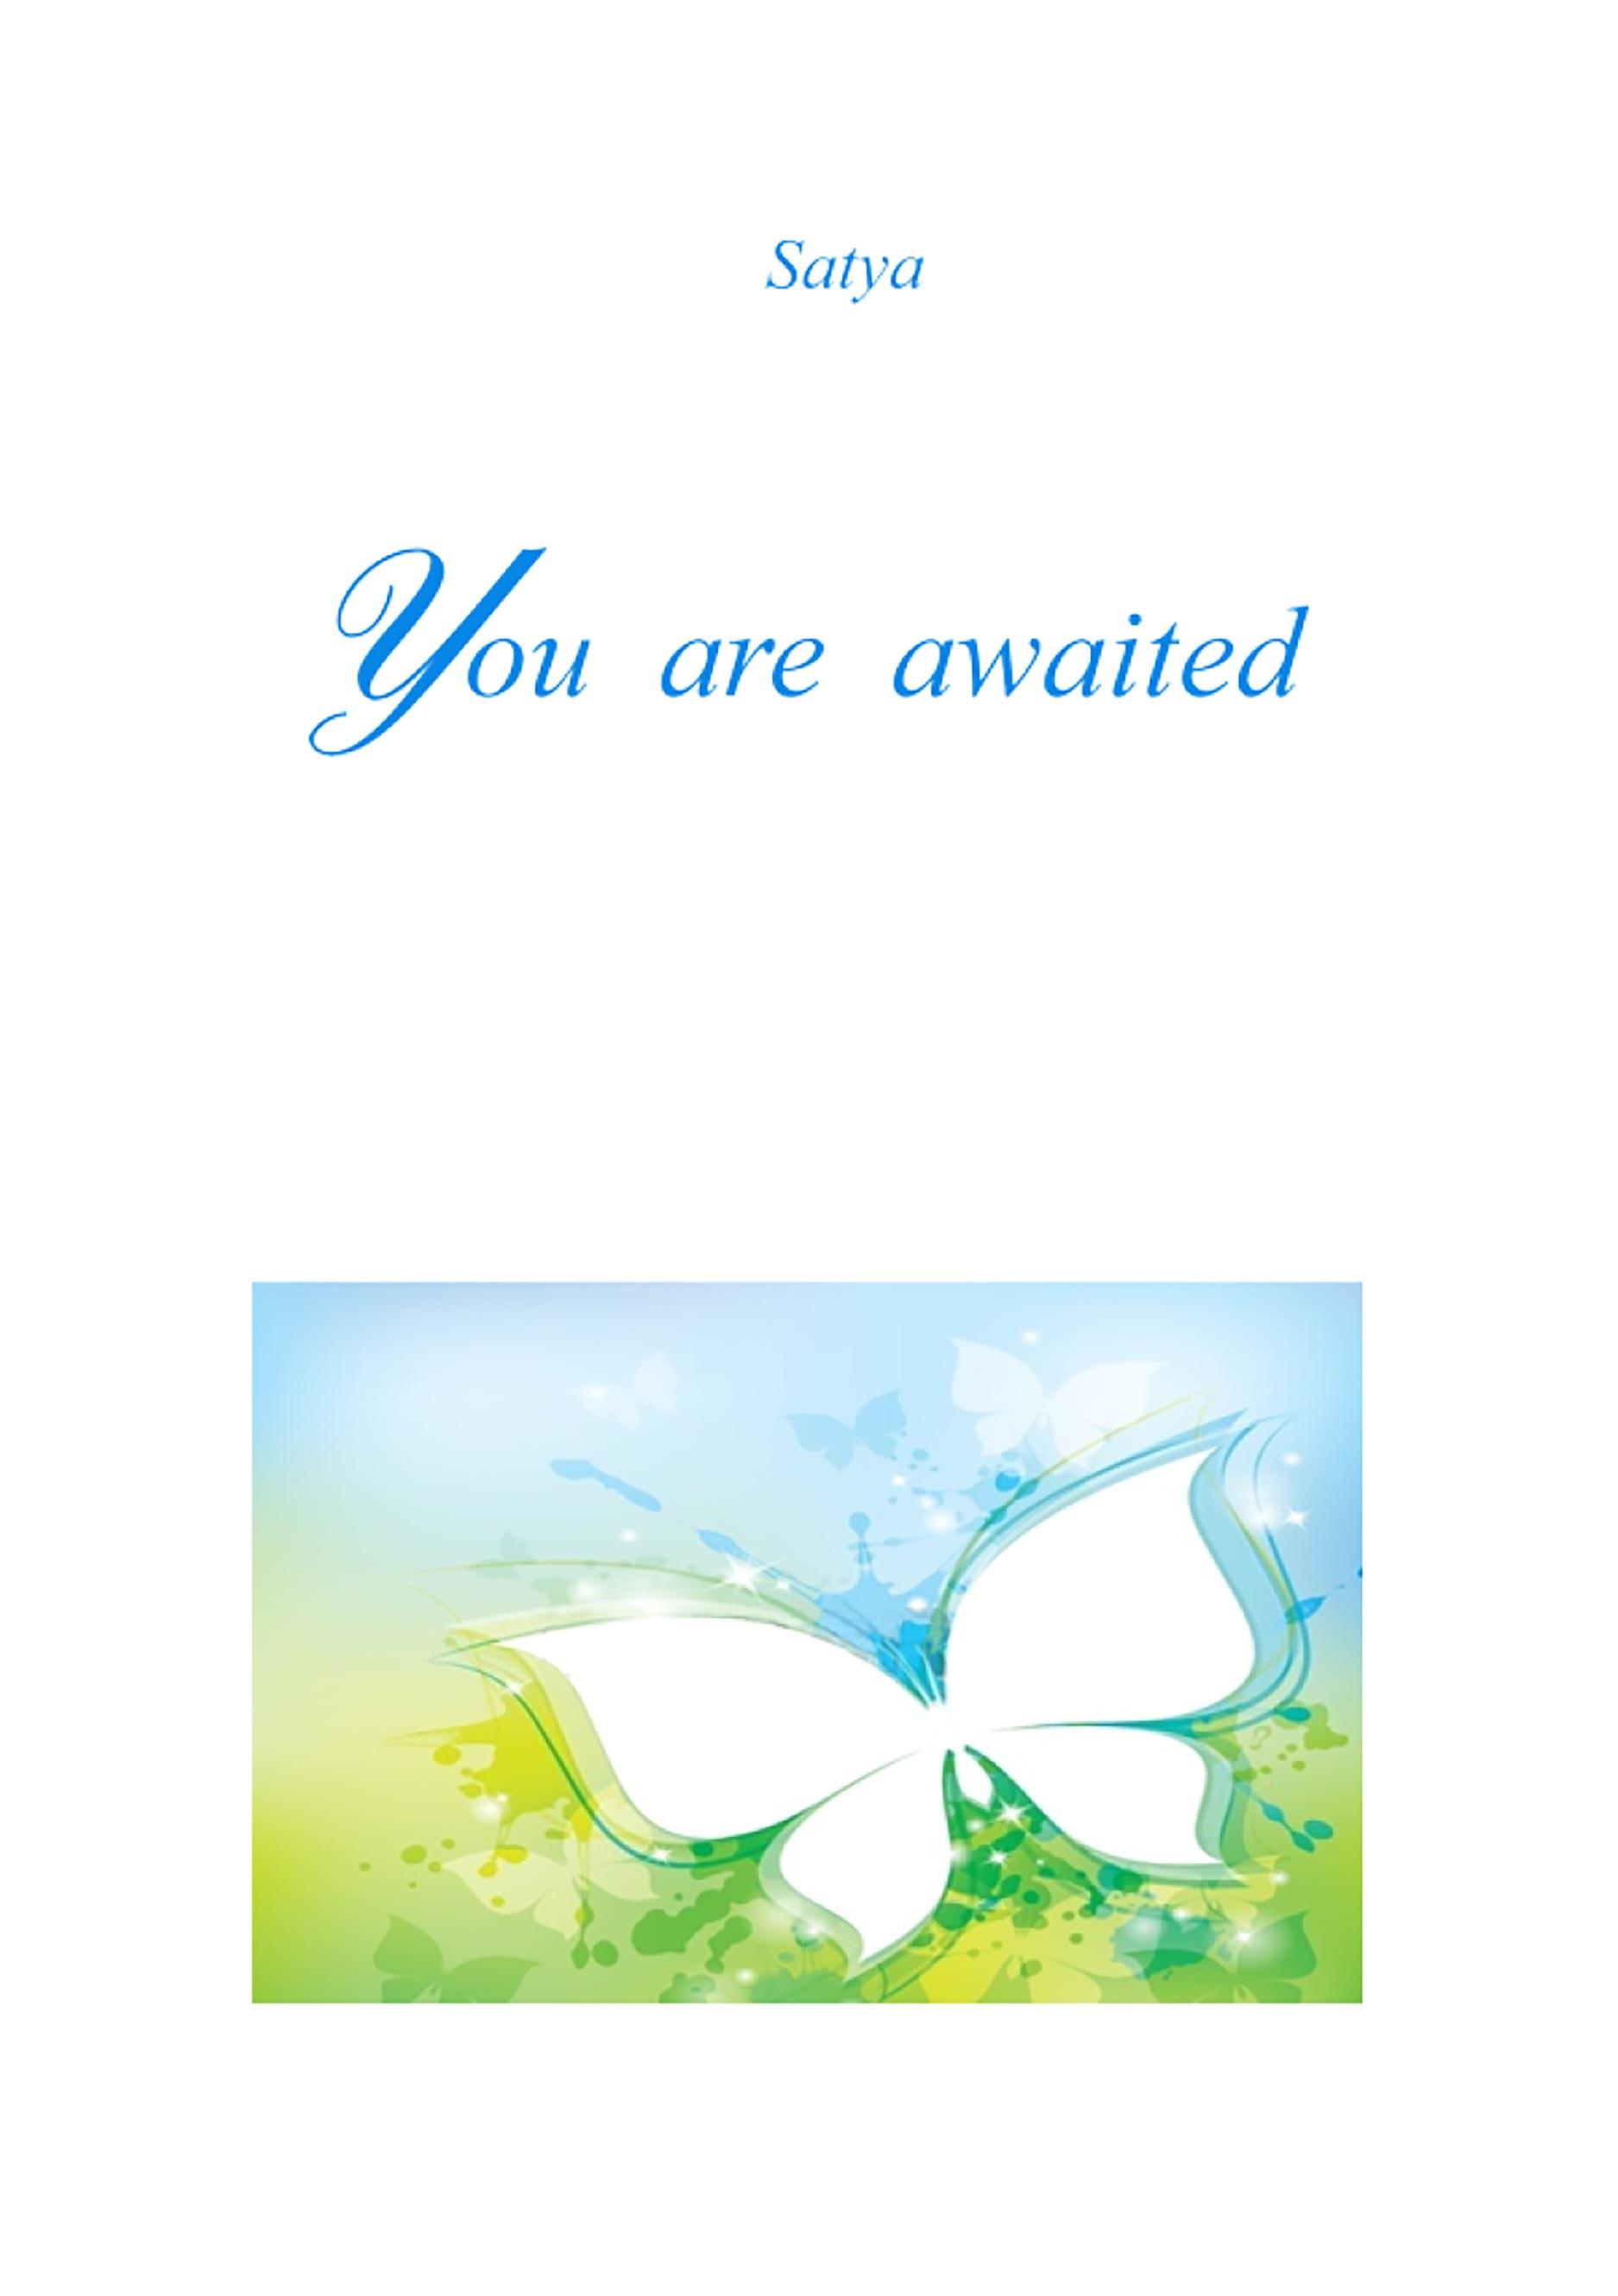 You are awaited